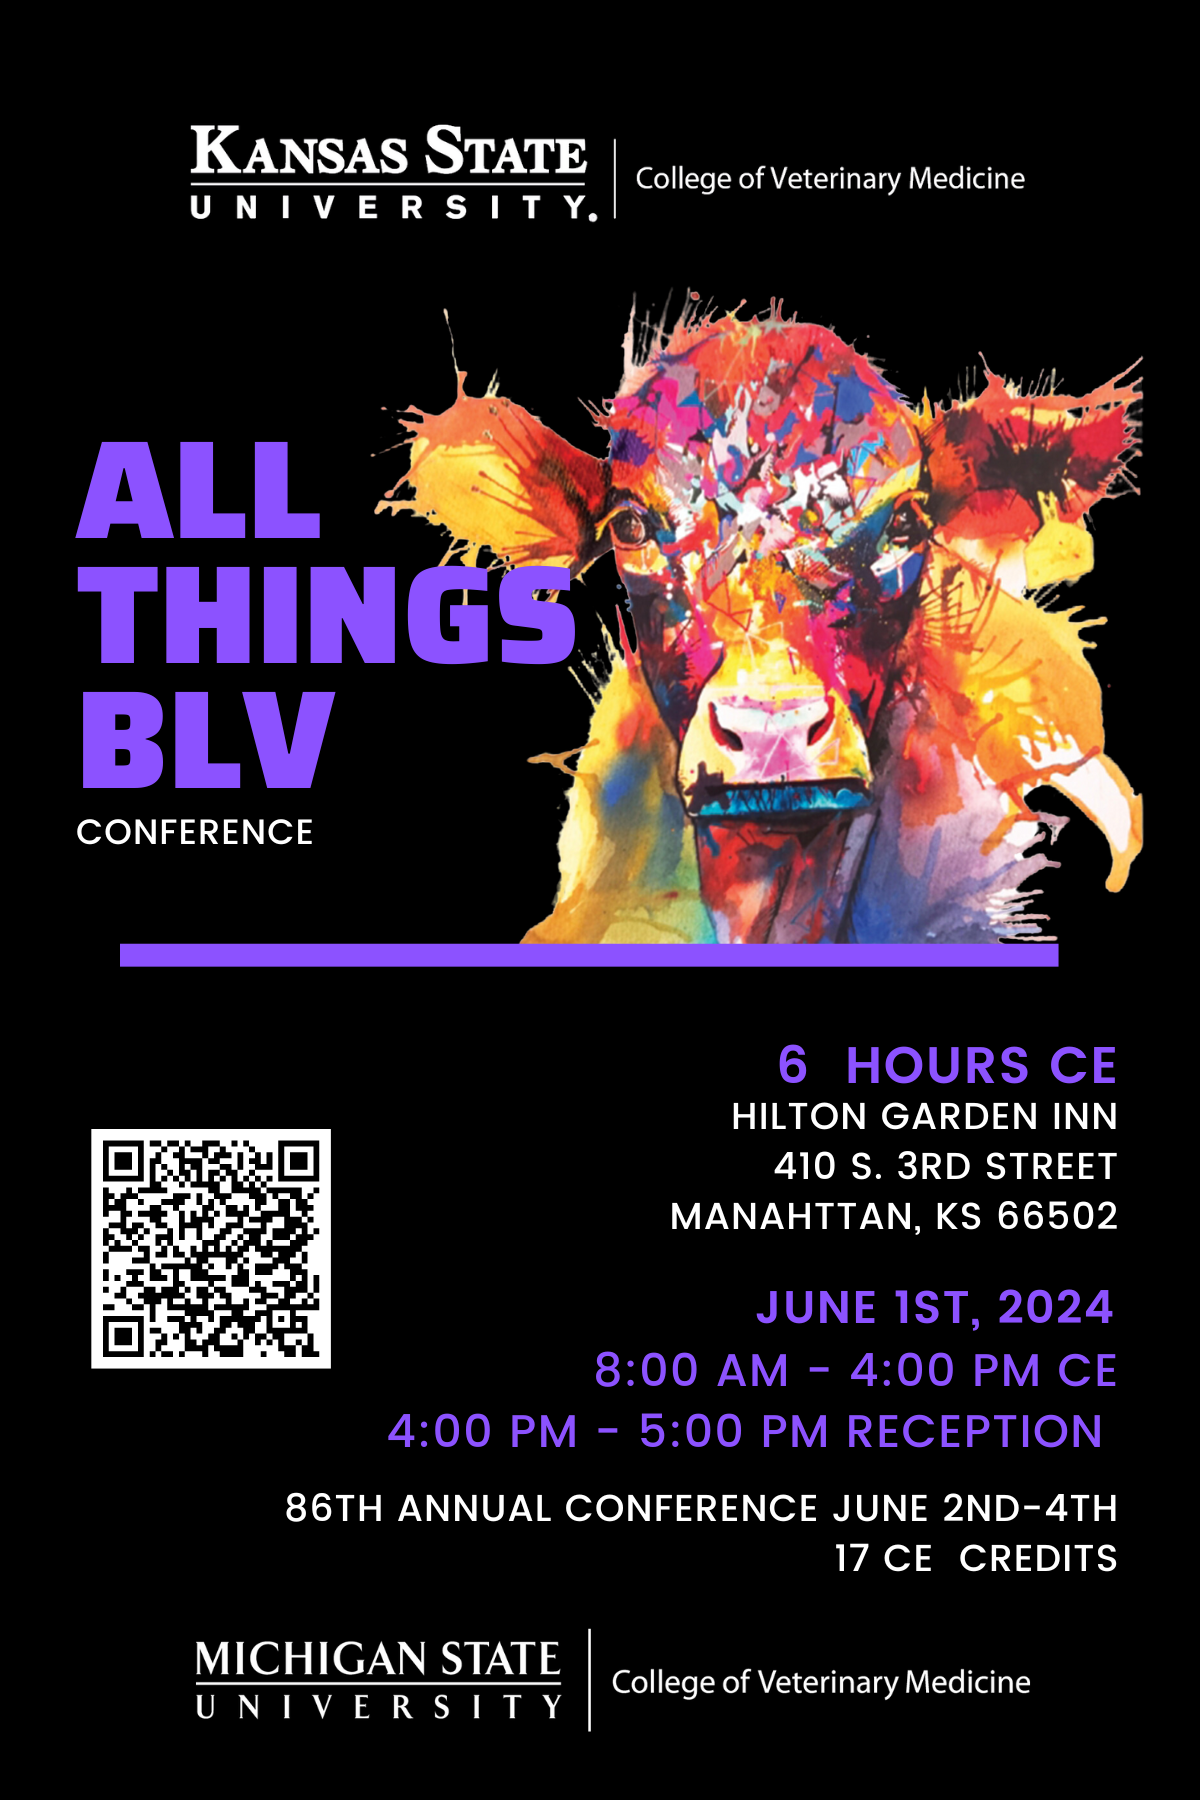 All Things BLV flyer